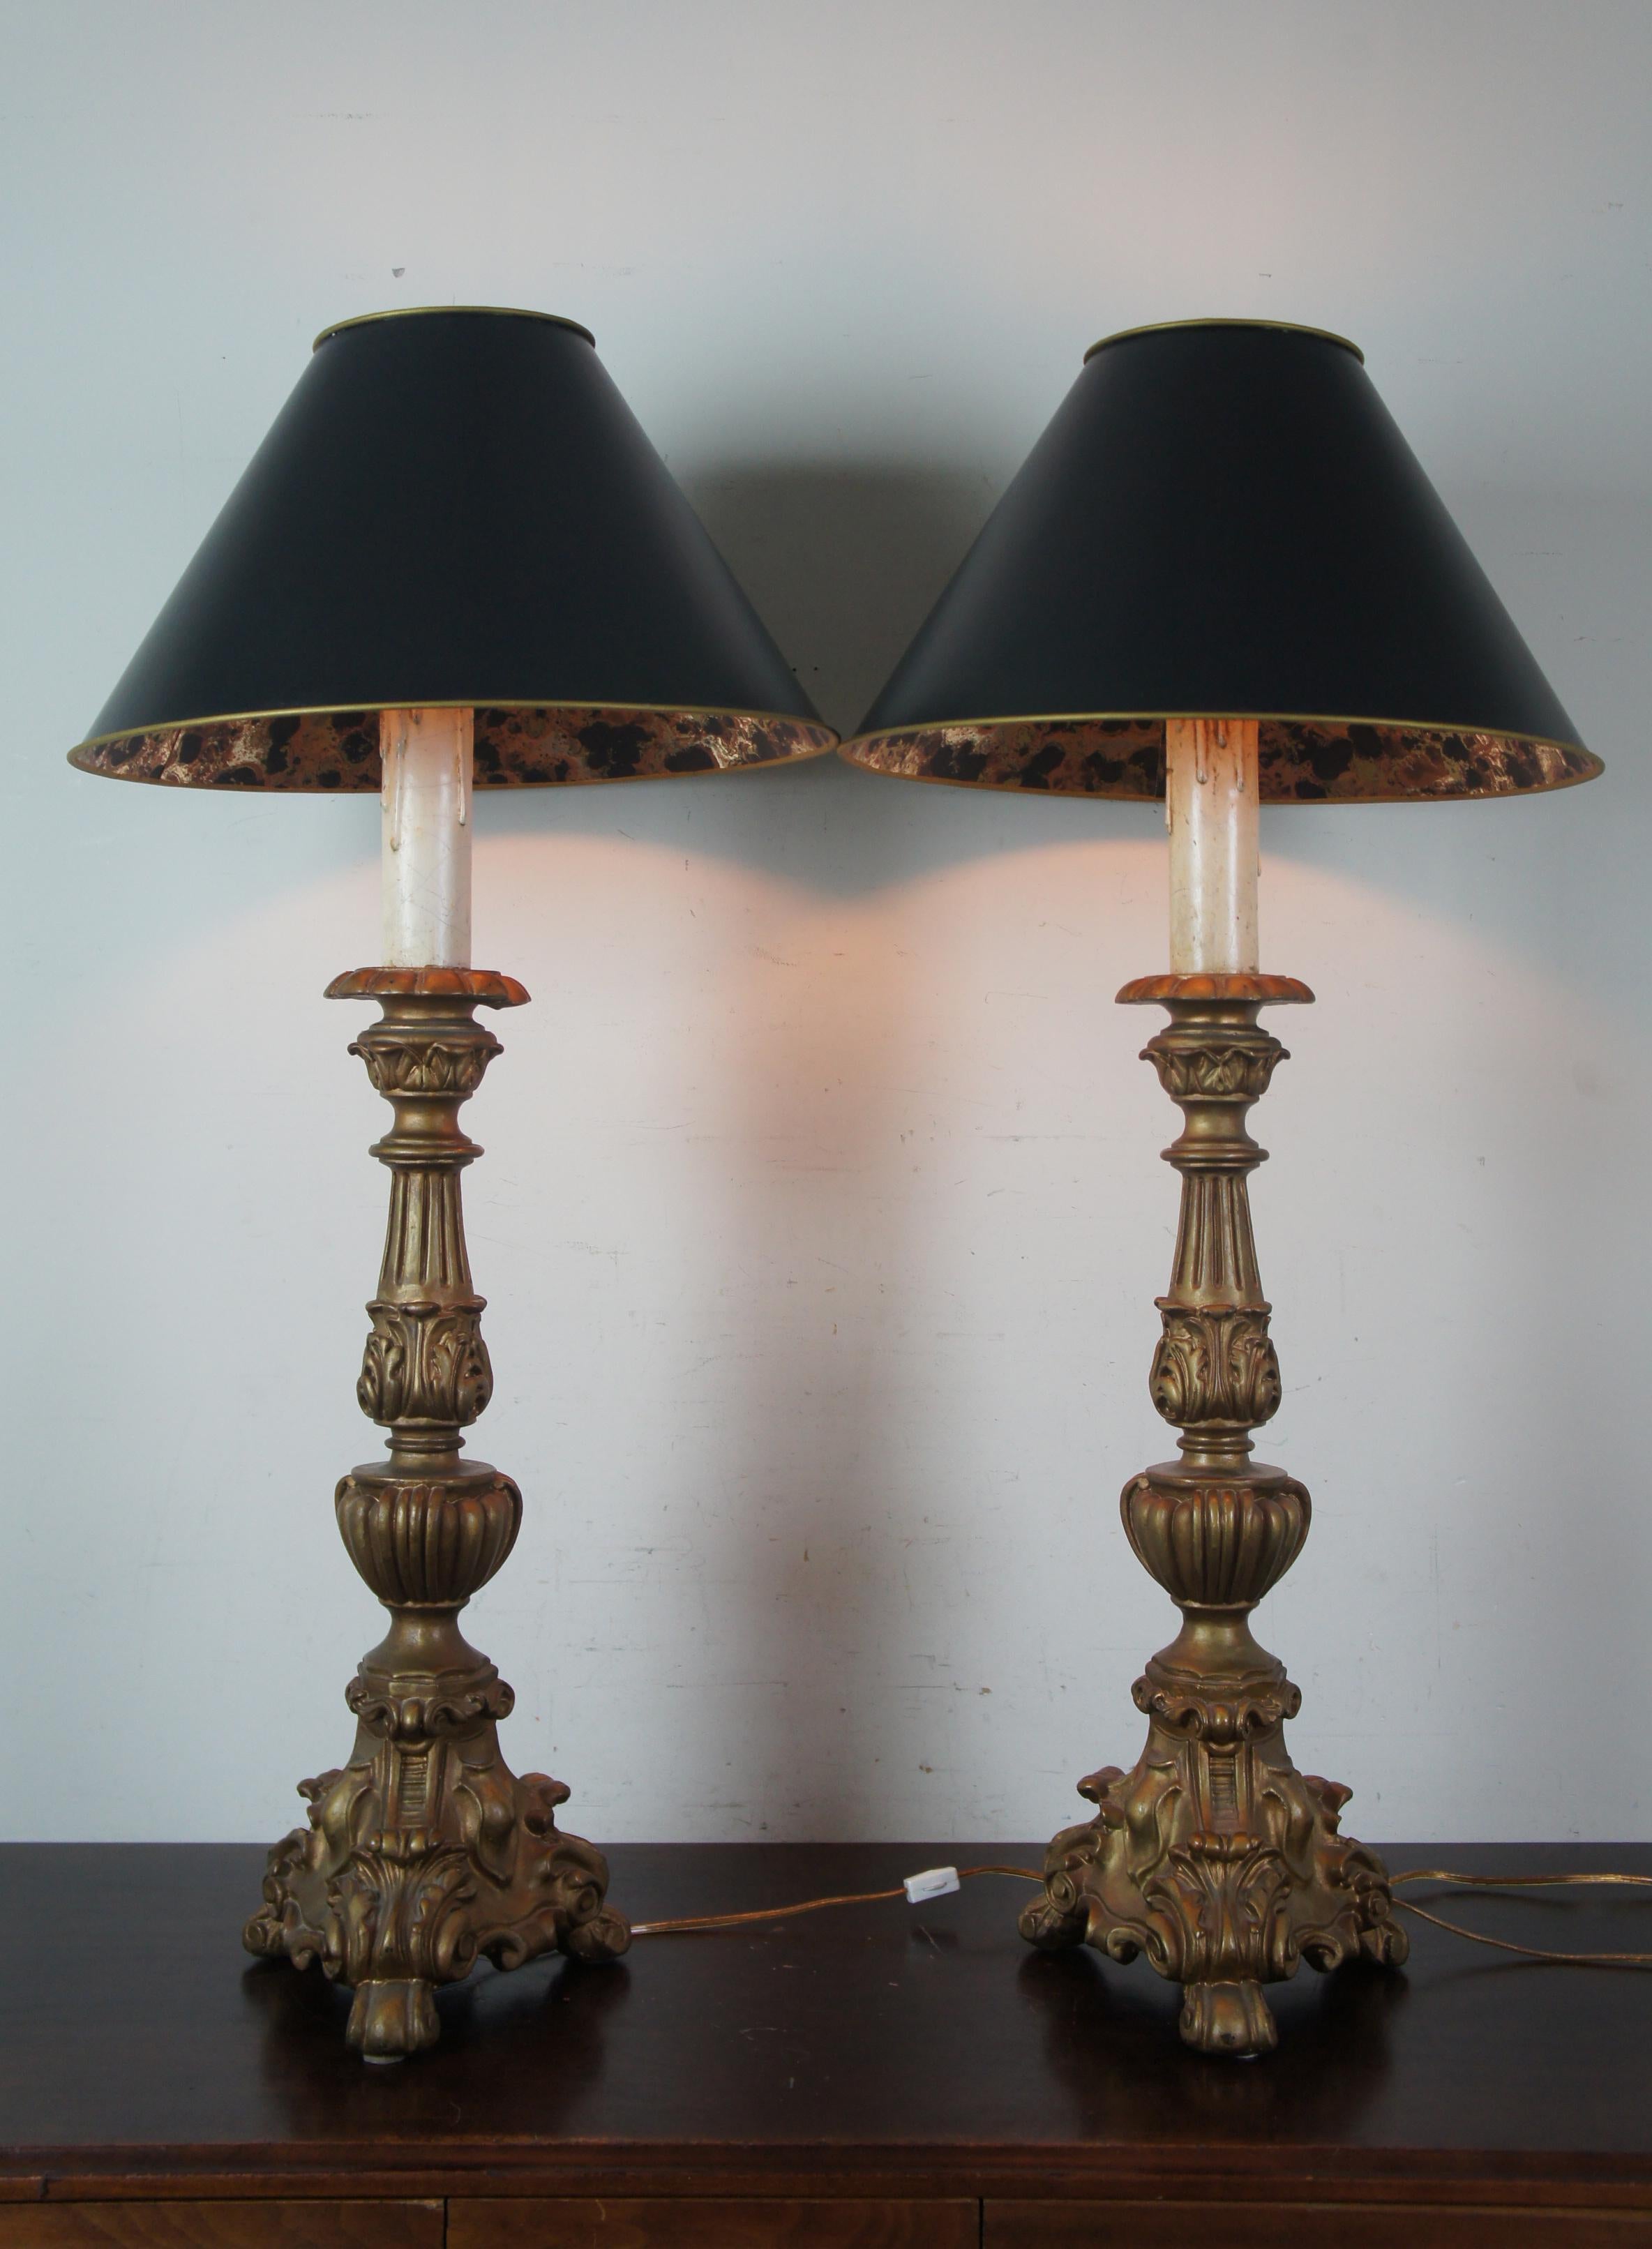 20th Century Pair of 2 Vintage Baroque Alter Candlestick Table Lamps with Black Foiled Shades